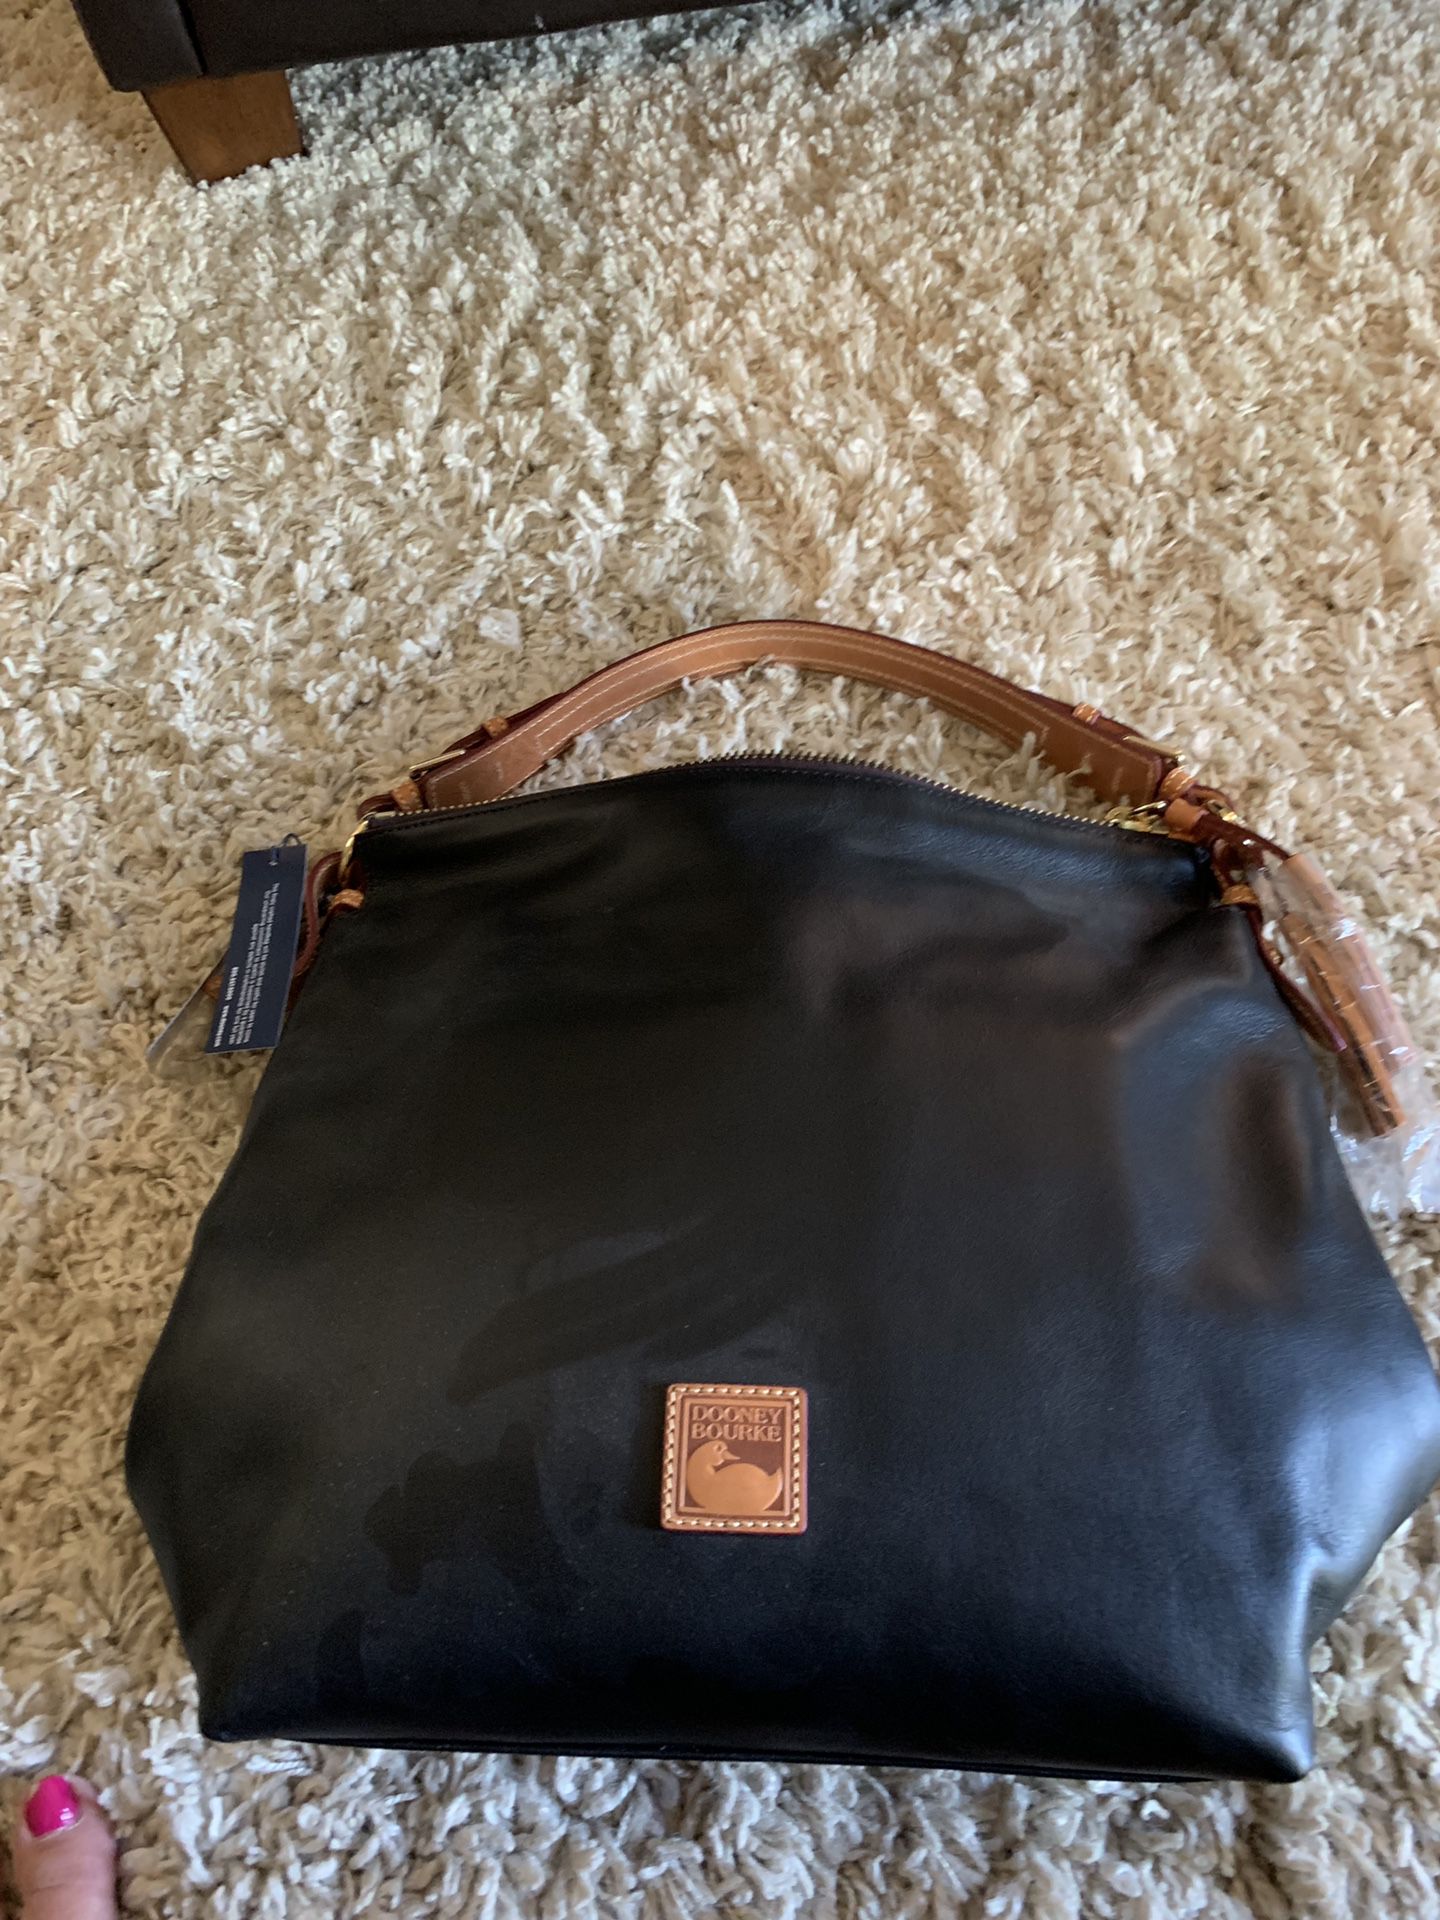 Dooney &Bourke purse new with tags